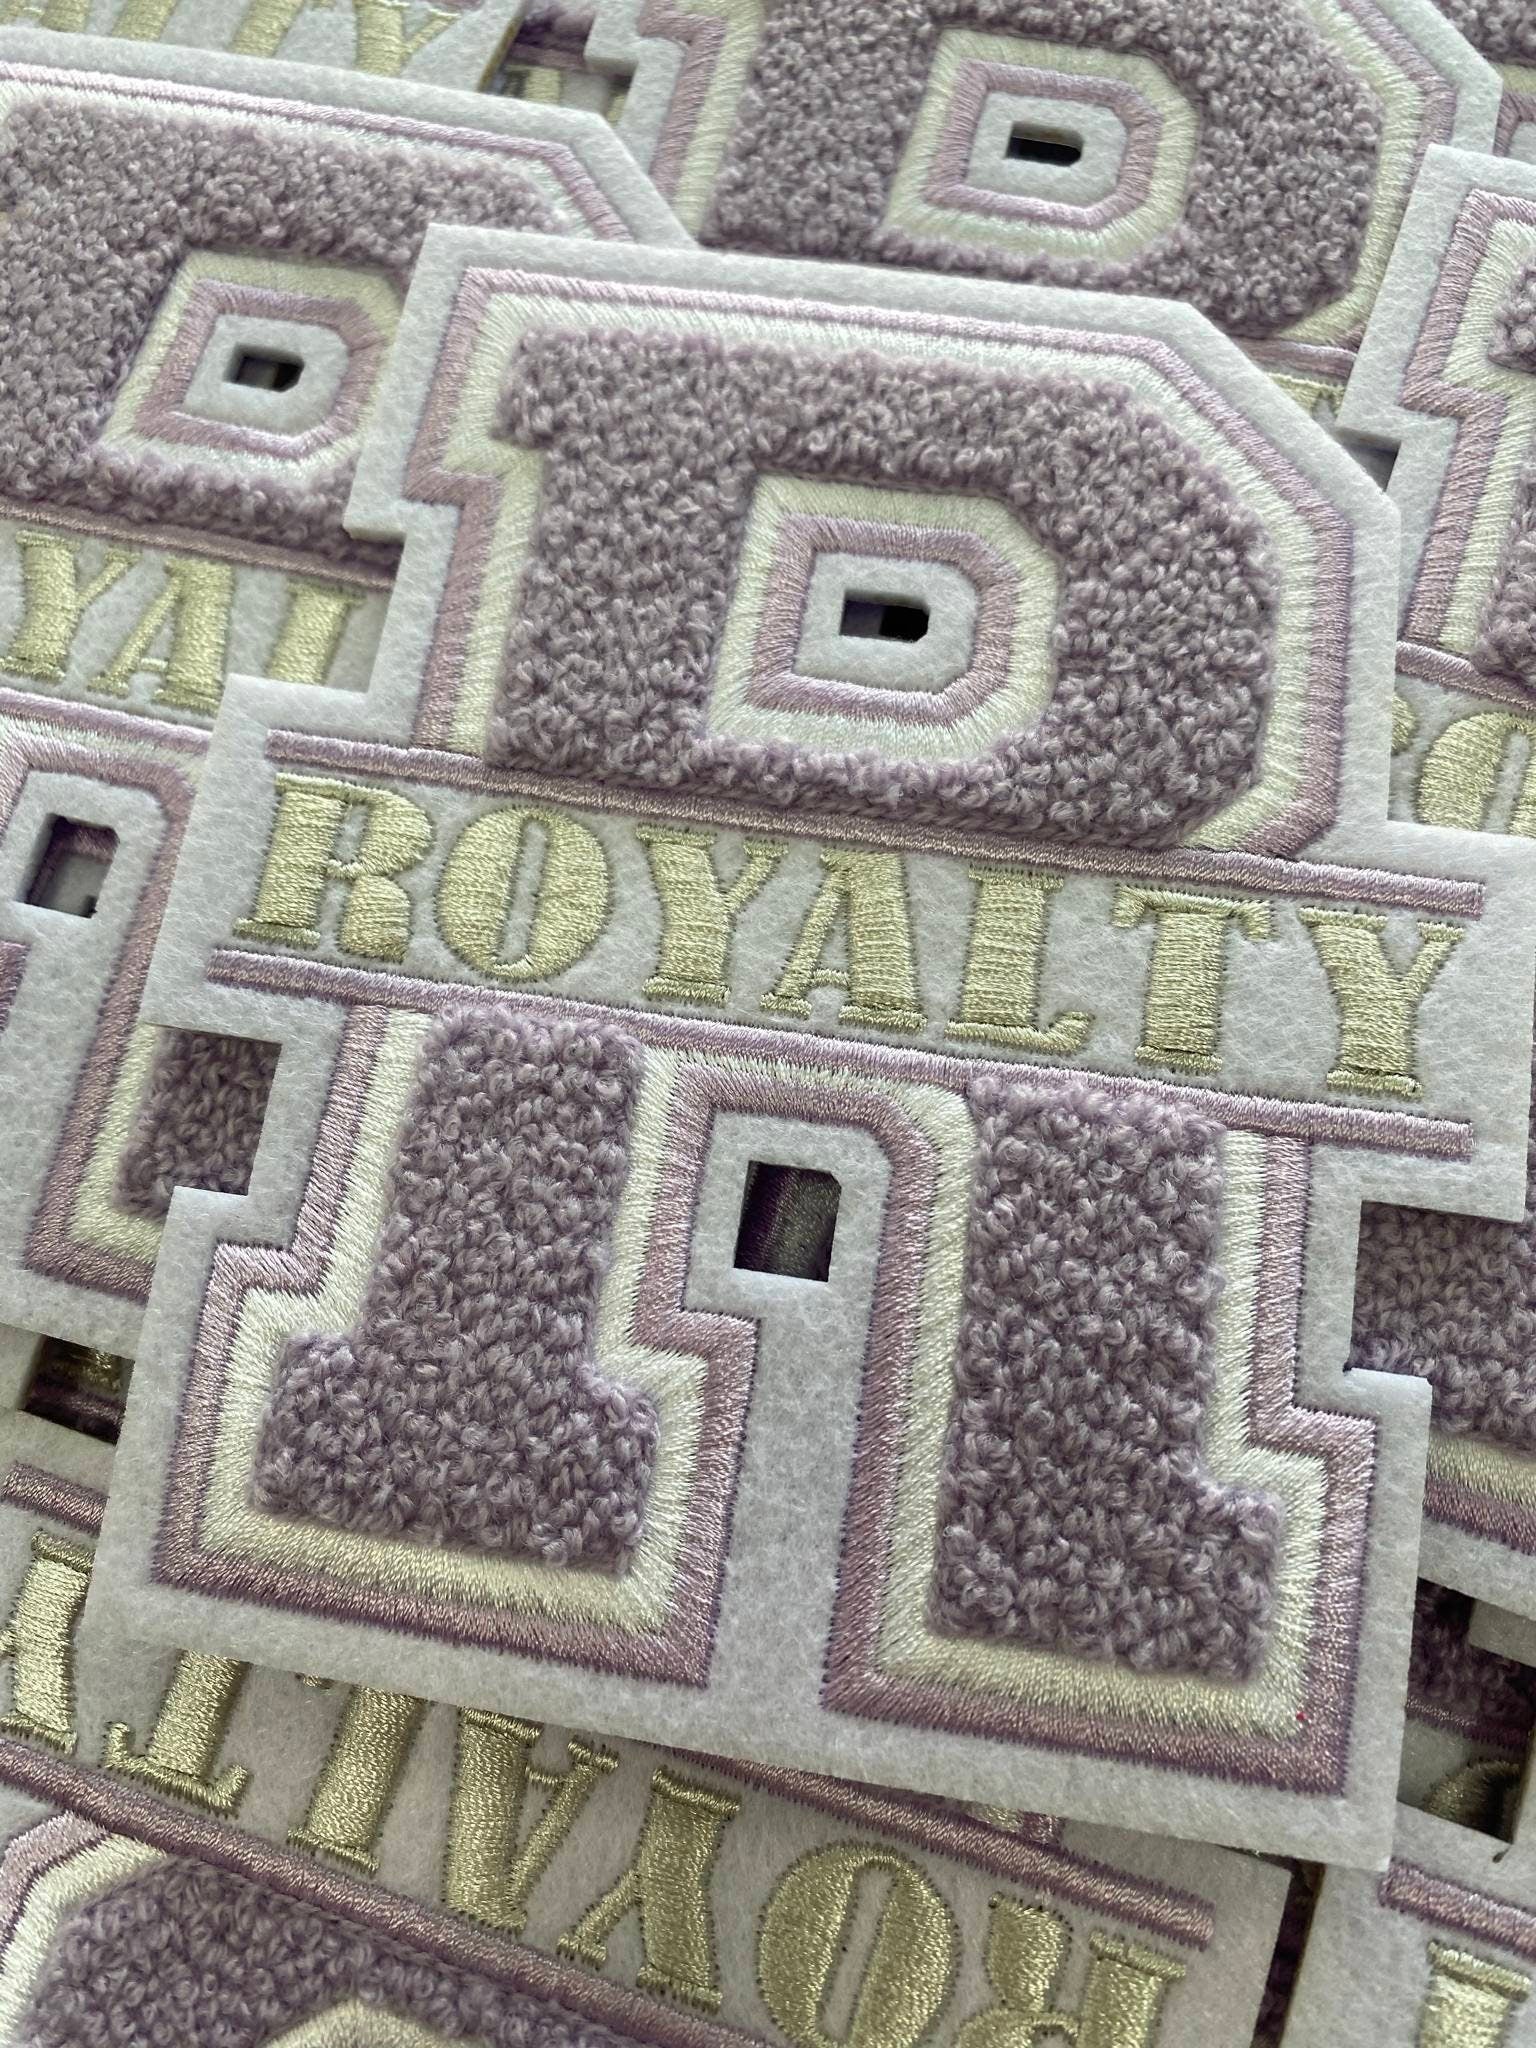 New, Monogram Letter, "R" Royalty, Chenille Iron-on Patch, Size 6",Light Purple|Silver|White, Patch for Jackets and More